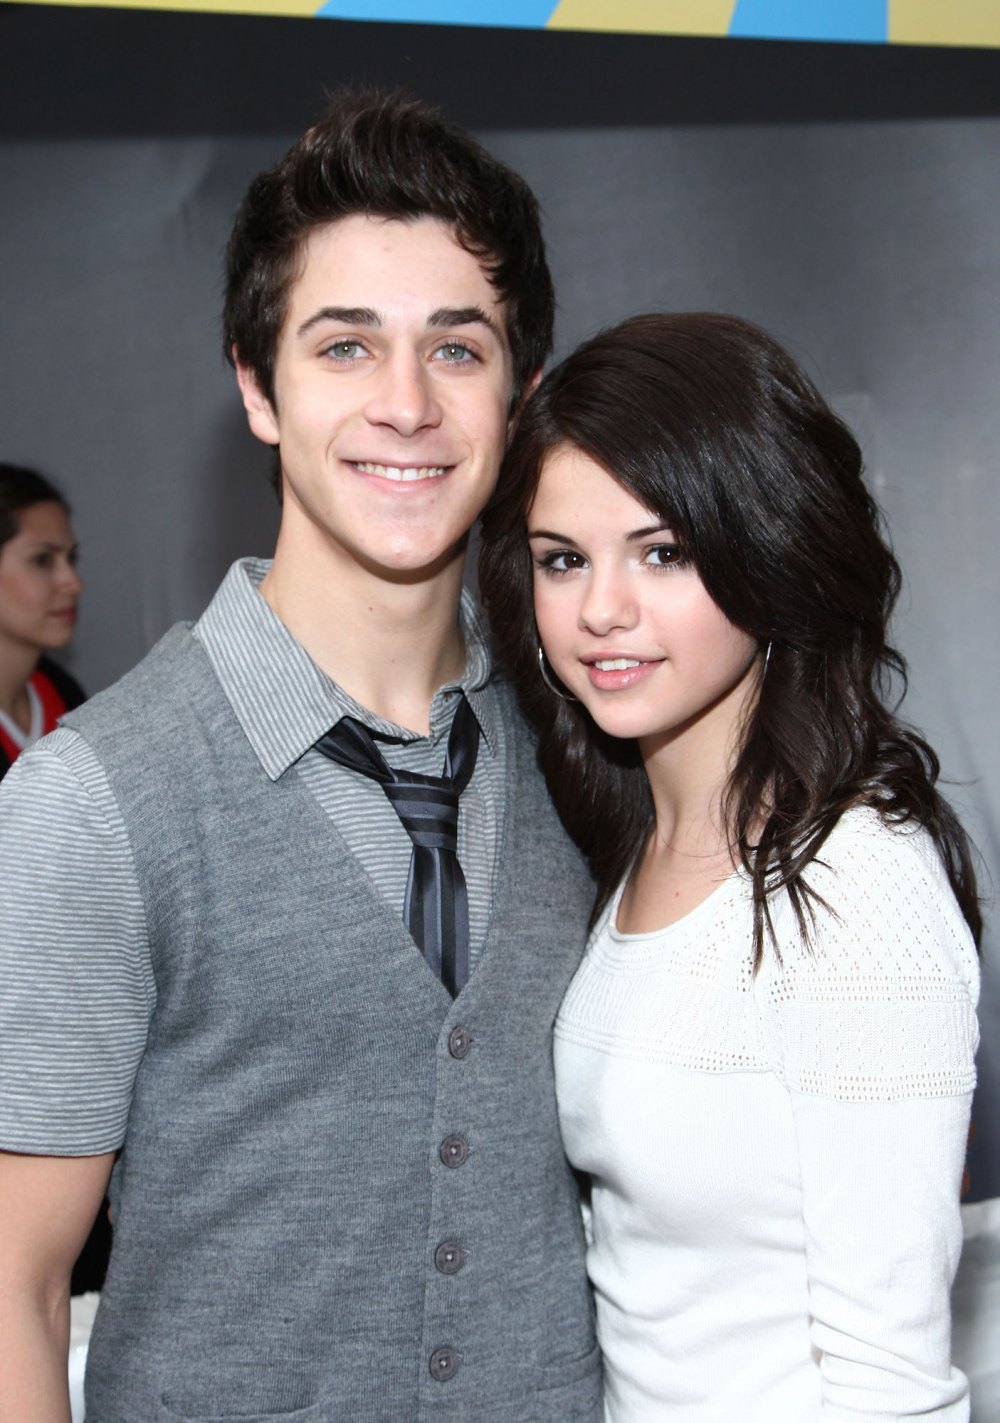 Selena Gomez Will Return as Alex Russo in New Wizards of Waverly Place Pilot With David Henrie